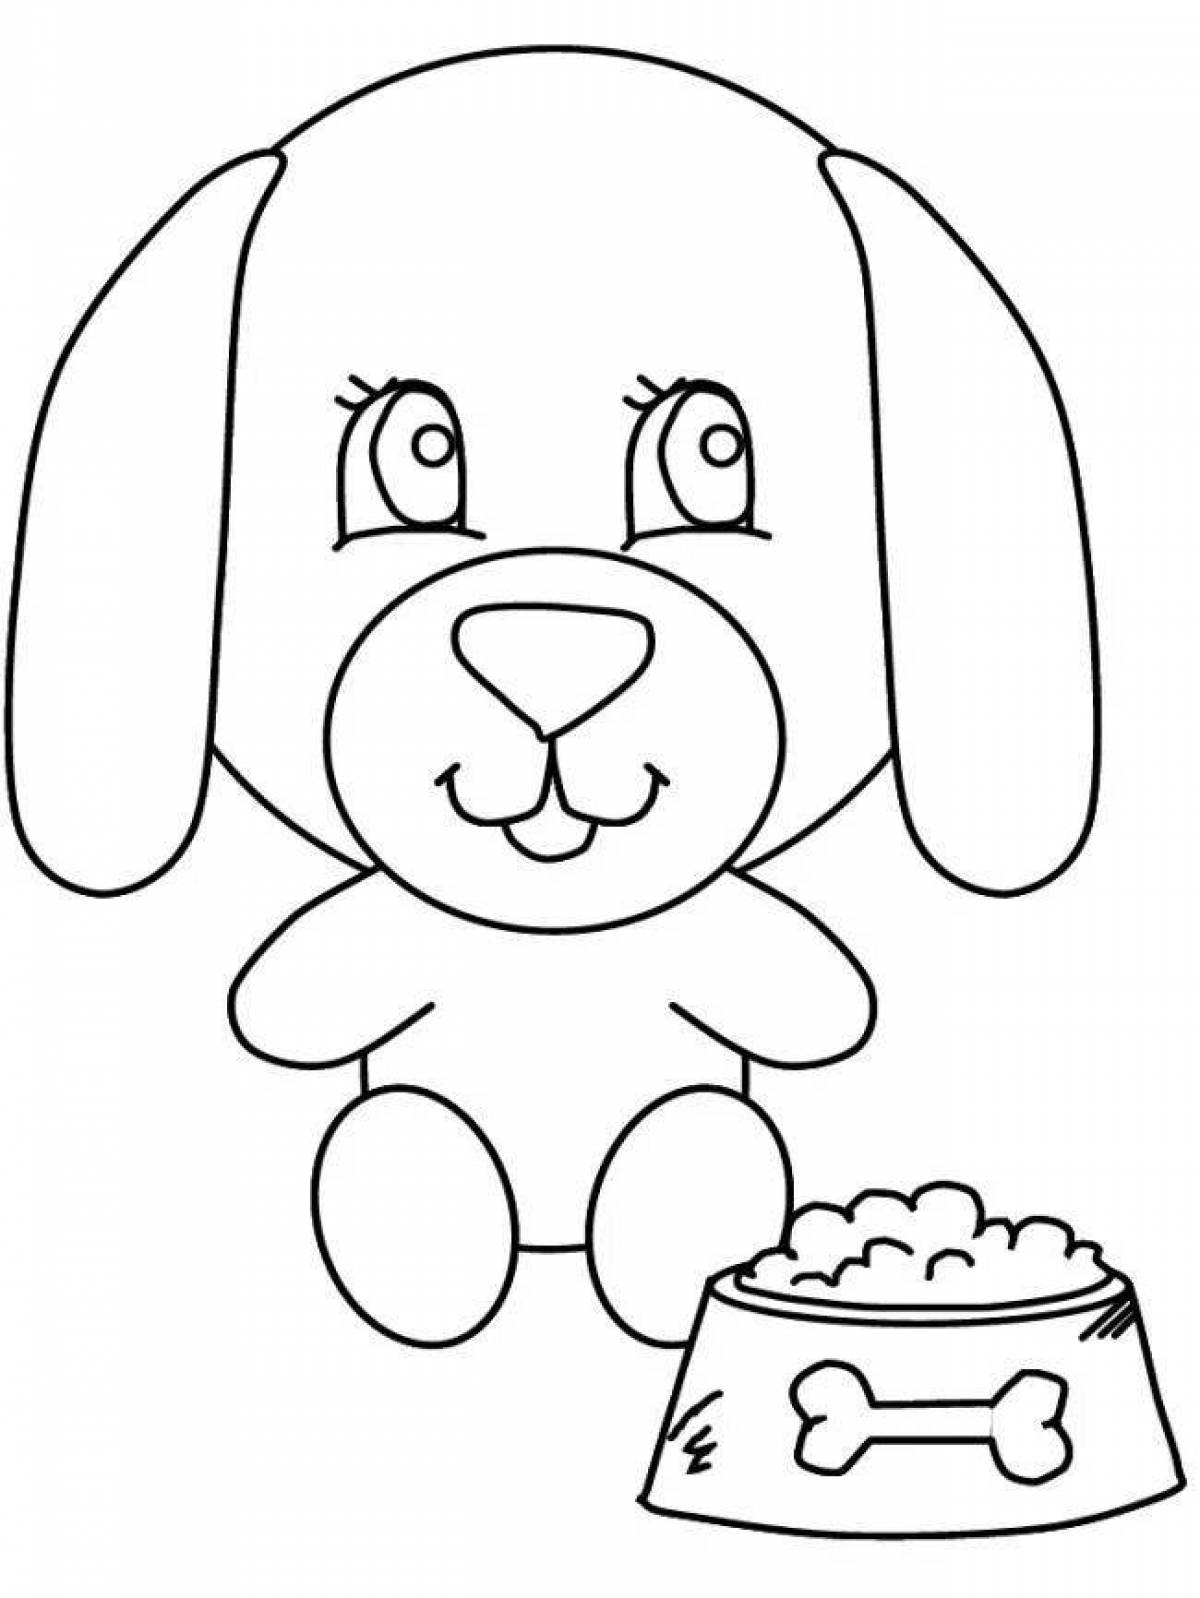 Wagging dog coloring page for kids